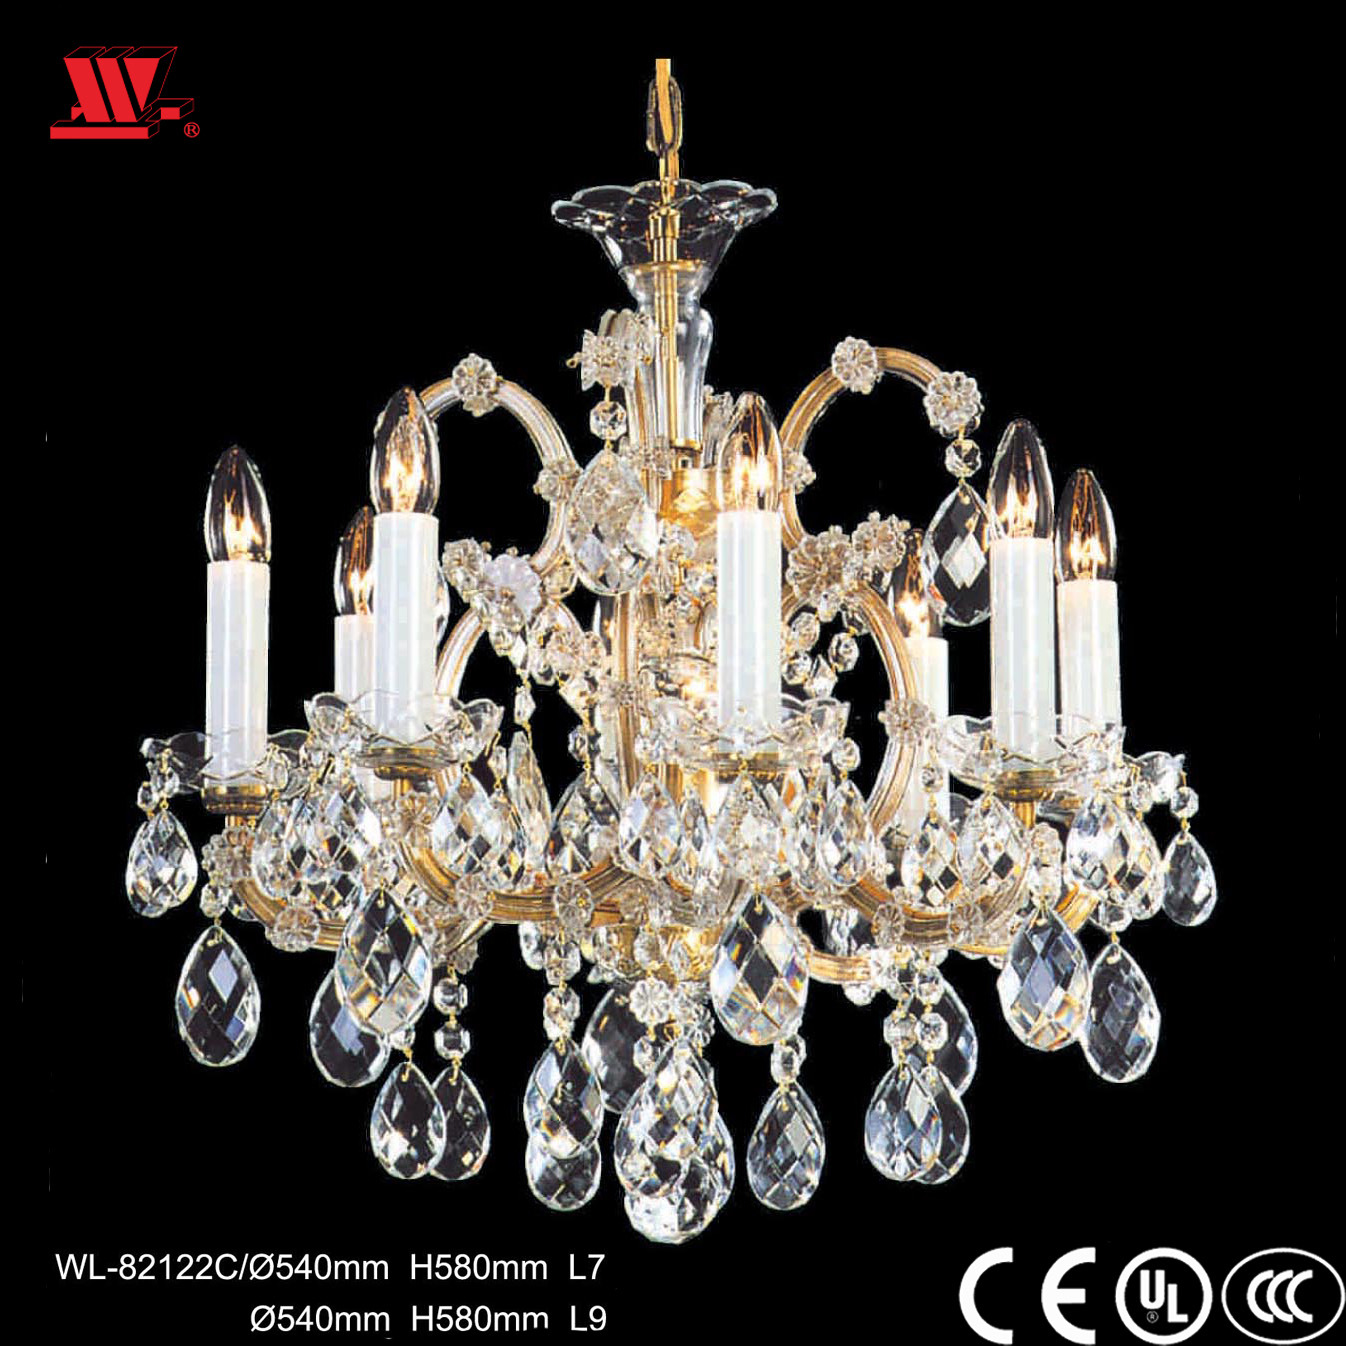 Traditional Crystal Chandelier Wl-82122c